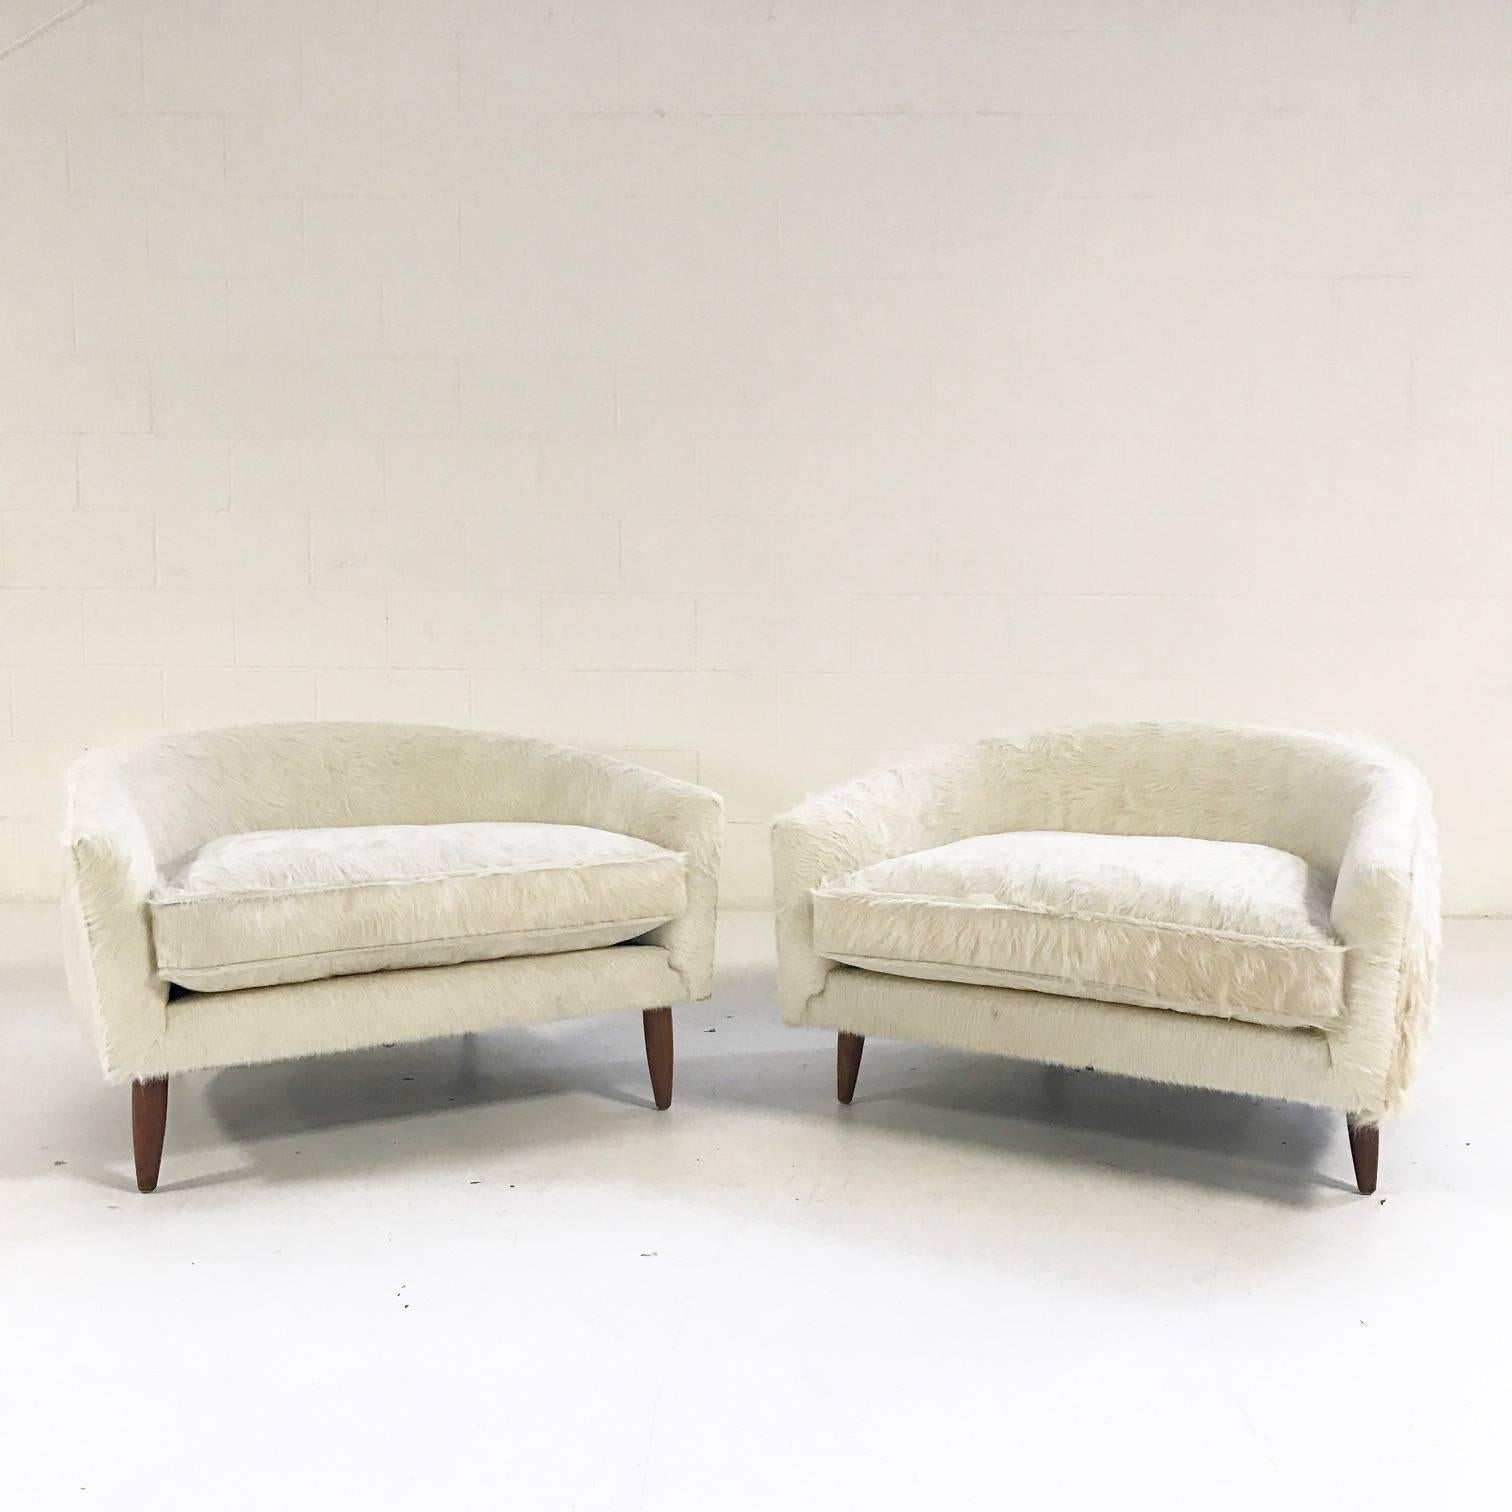 Lightning struck when we acquired this very rare pair of cloud chairs. We knew exactly what they needed - our luxuriously soft, silky ivory Brazilian cowhide. We love the wide and low profile, a superb example of Pearsall's vivacious, swinging 60s